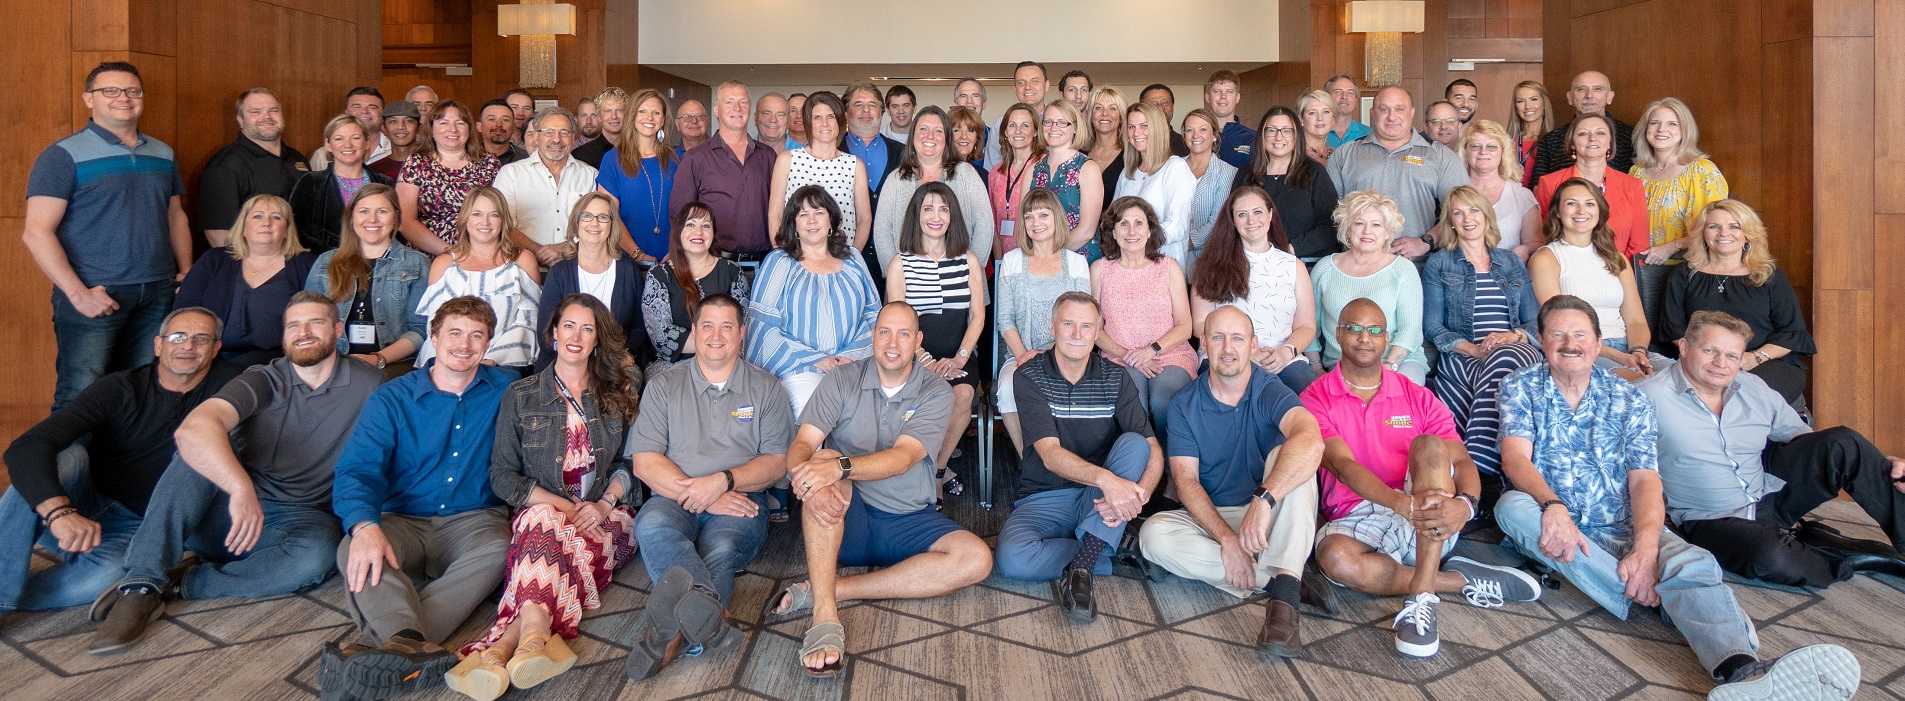 2019 MITS Annual Conference Group Photo